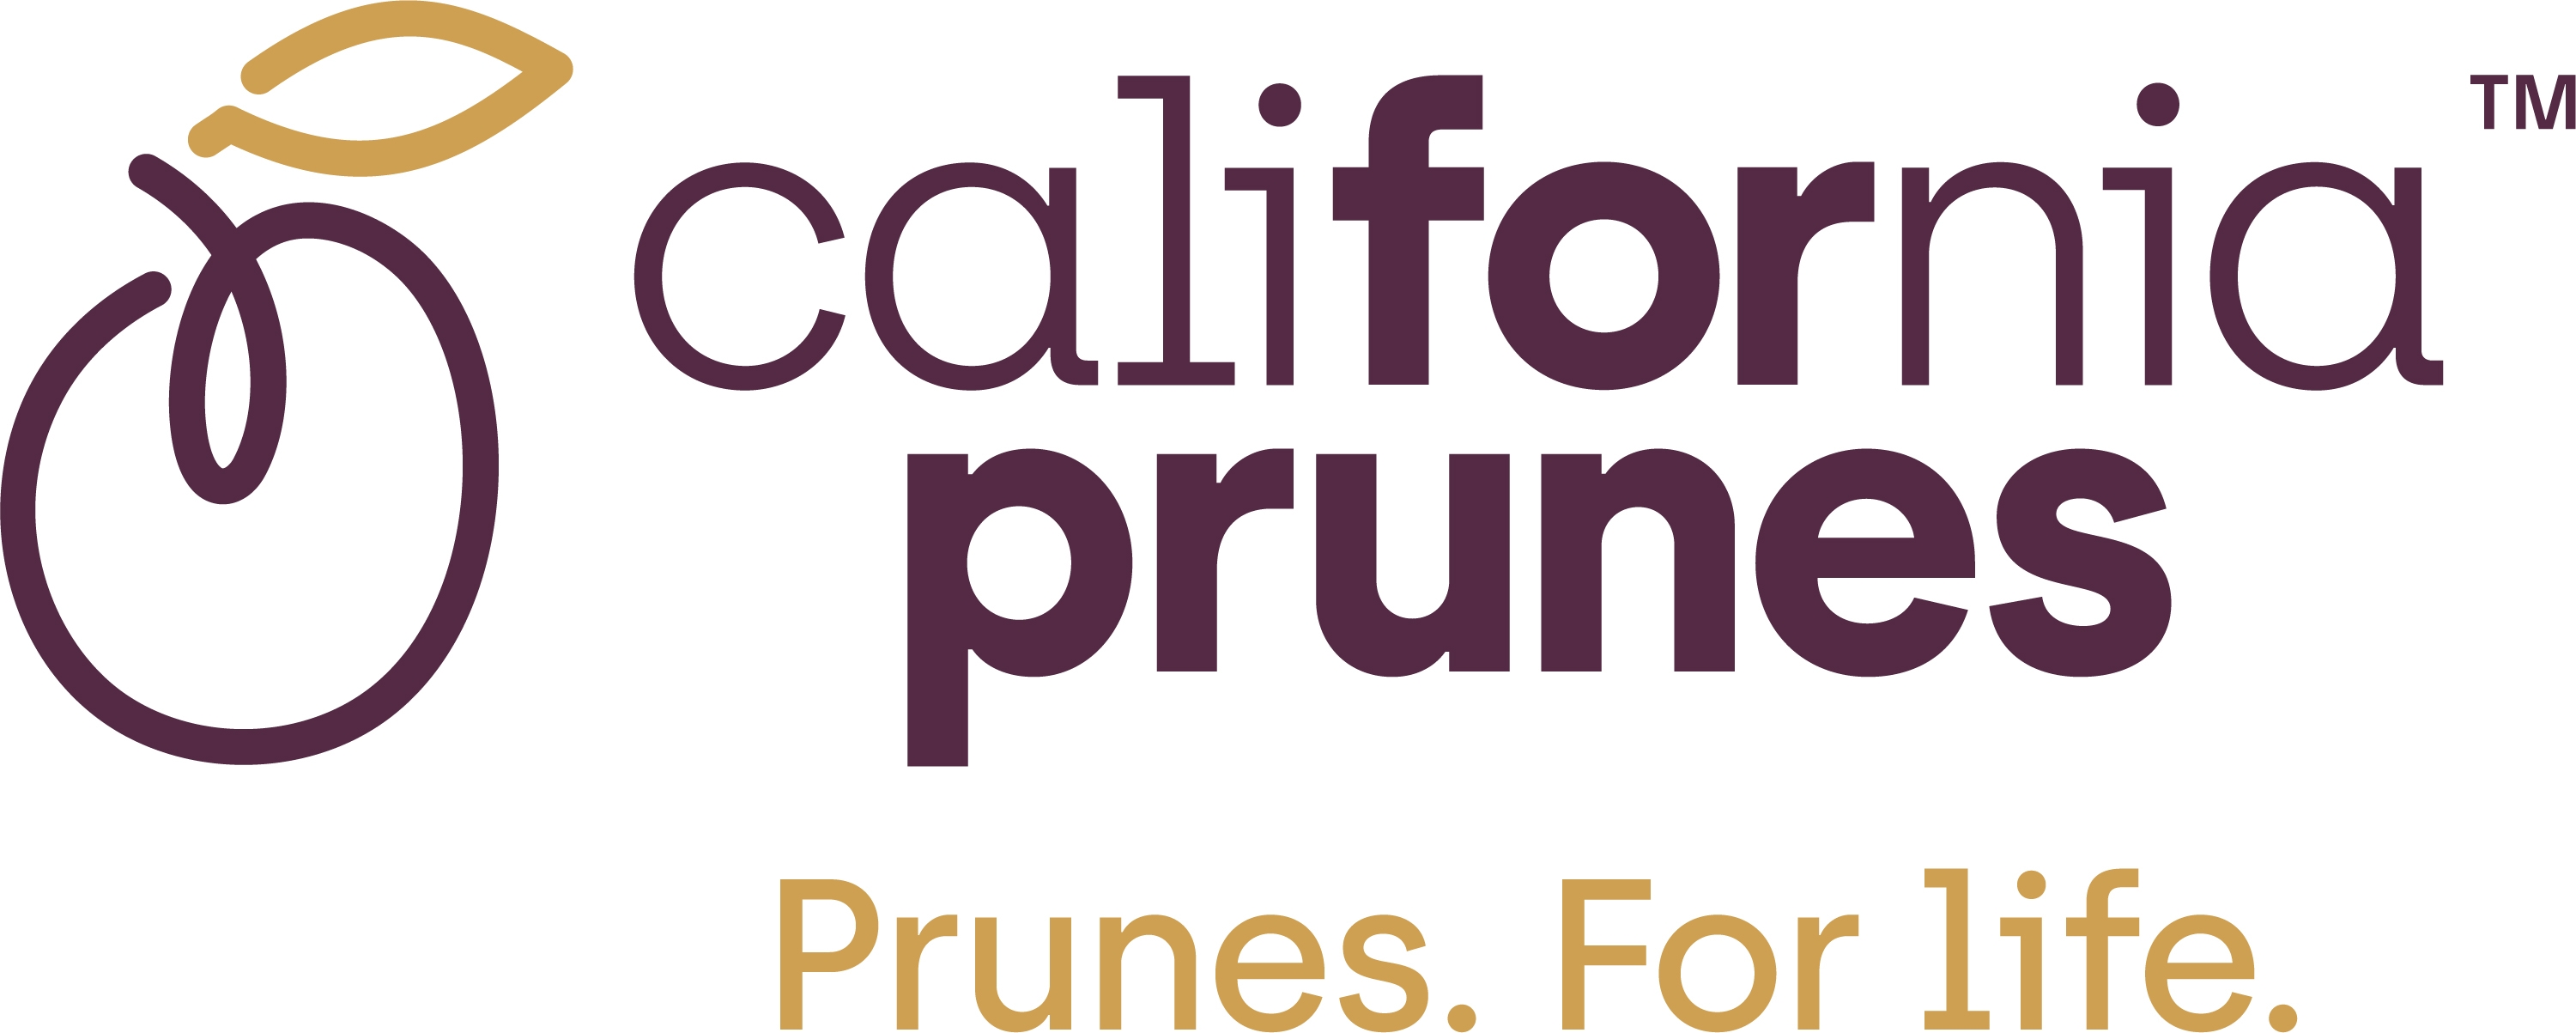 Add California Prunes to daily meals and snacks to benefit your bones, heart, and digestive health